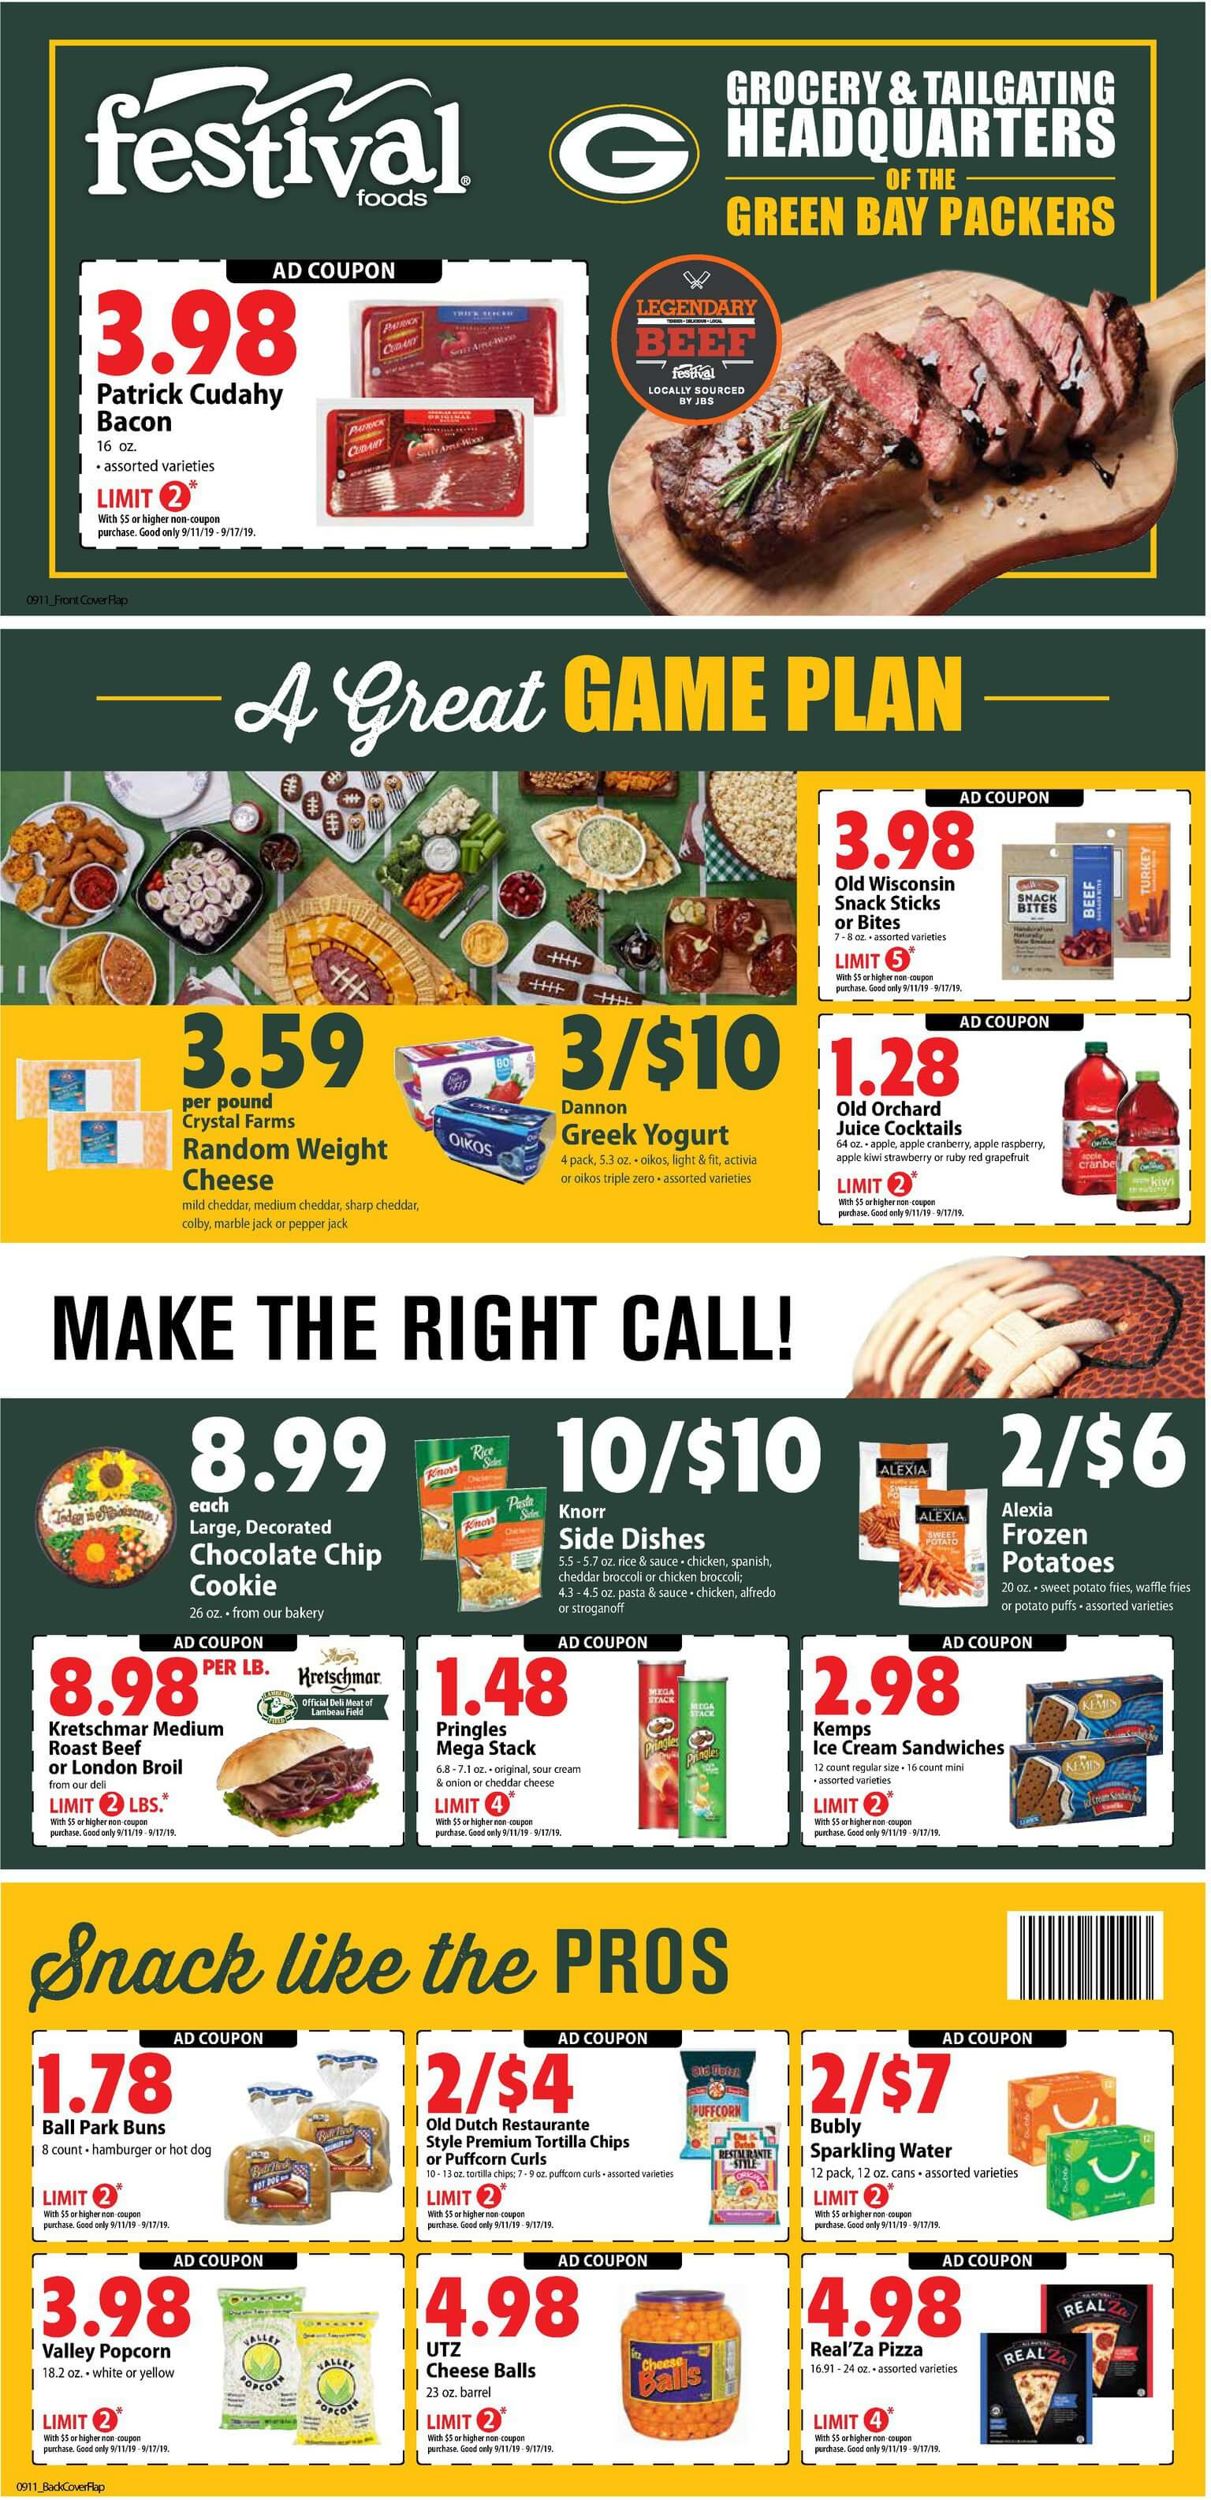 Festival Foods Current weekly ad 09/11 09/17/2019 [3]